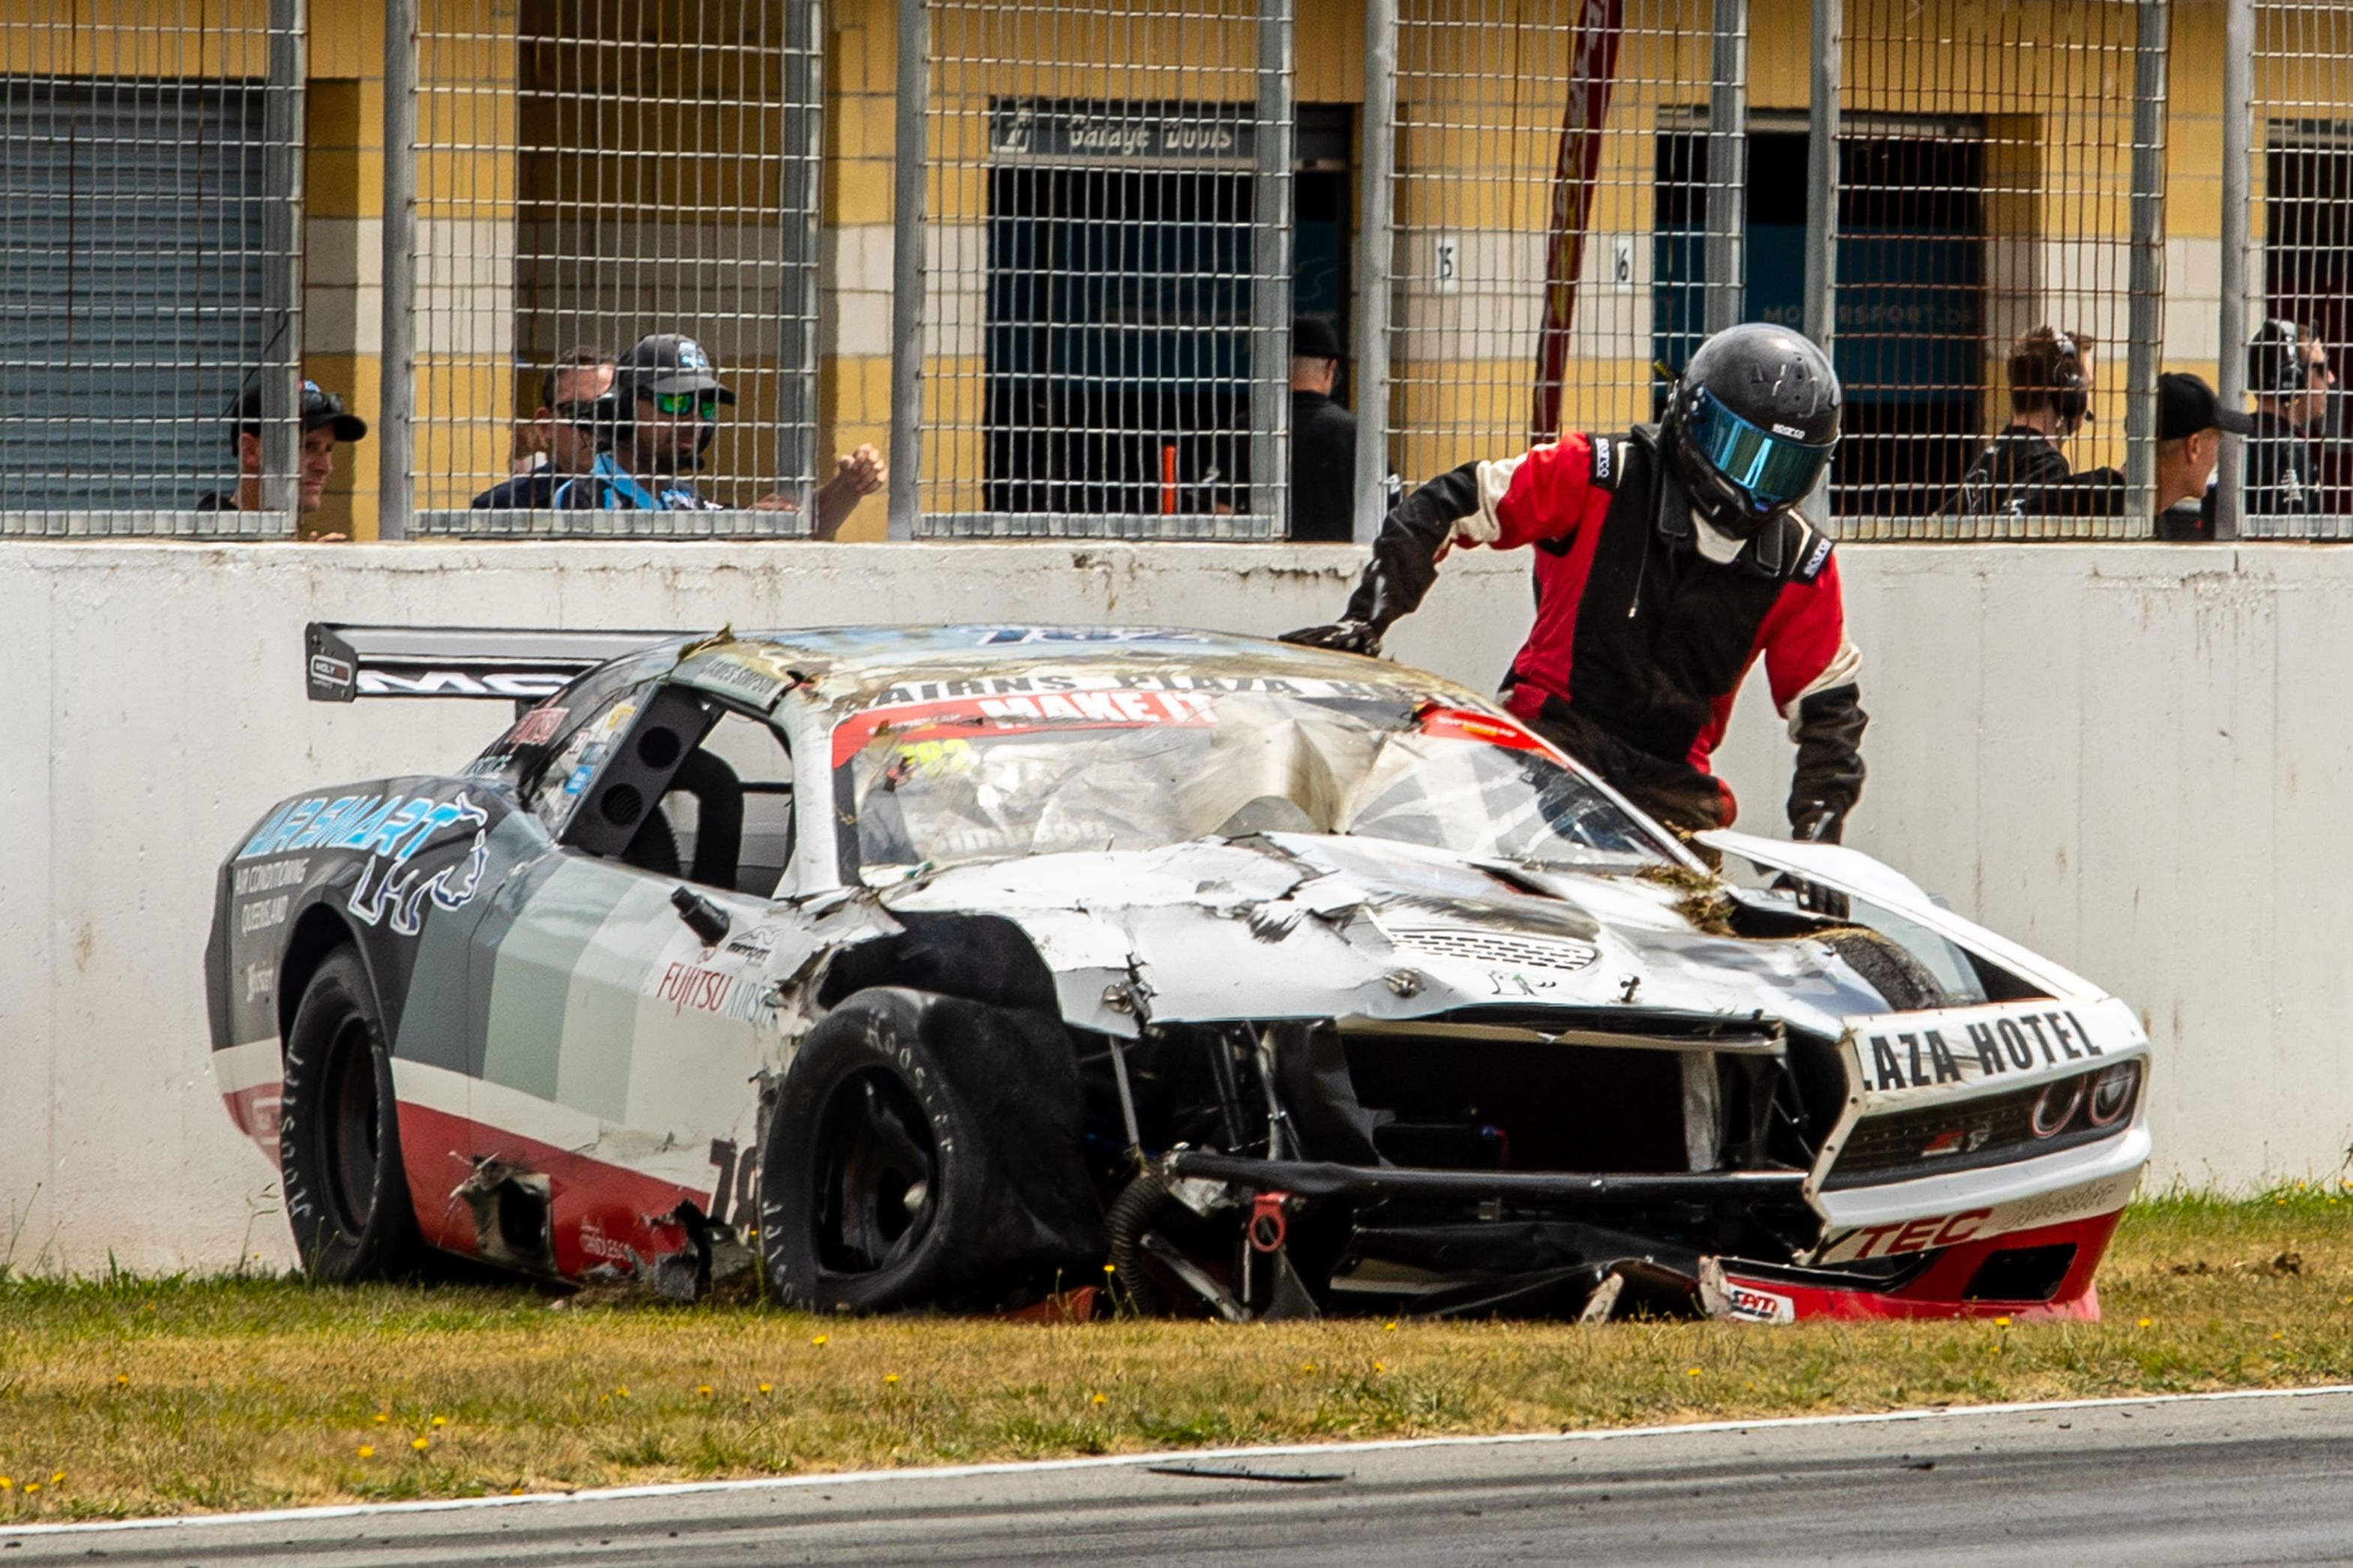 'Devastated' teenage Trans Am racer survives scary rollover at SpeedSeries